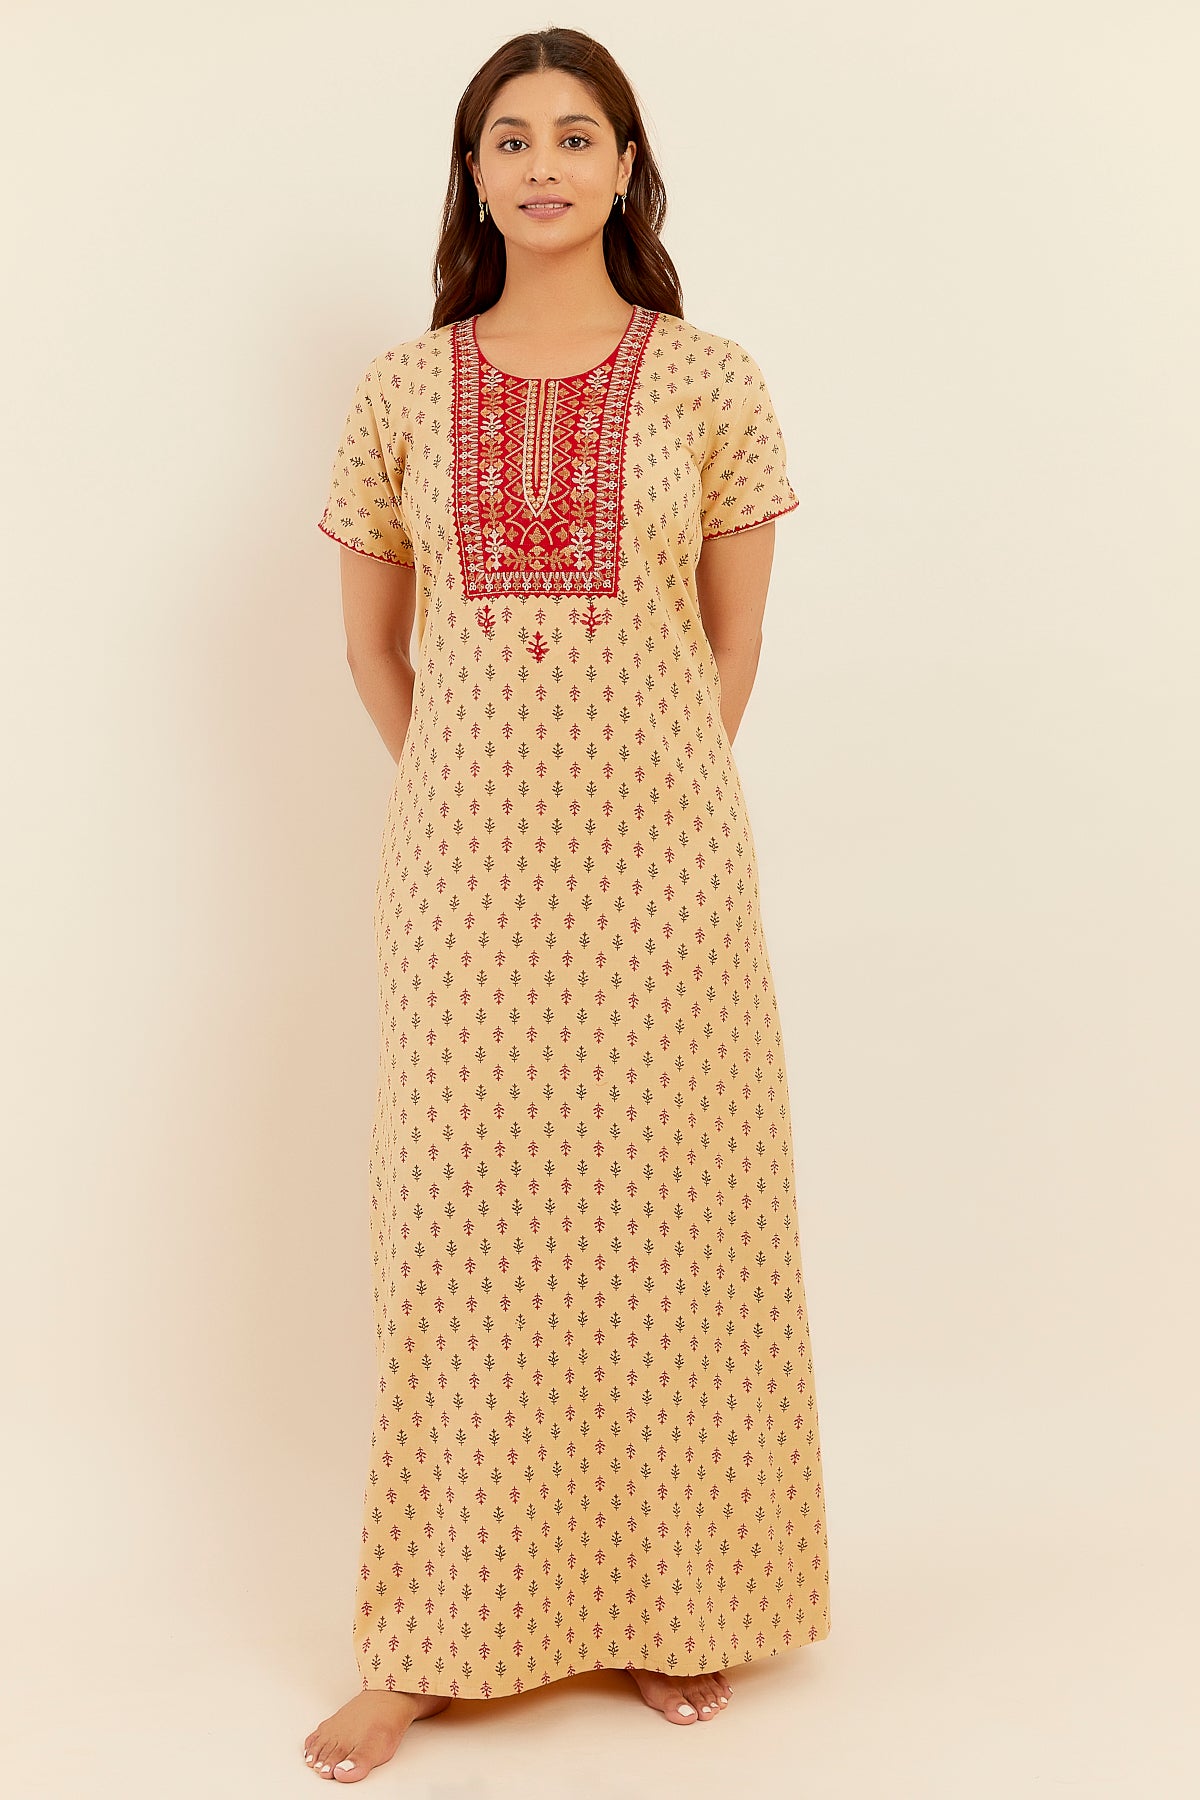 Floral Embroidered With Mirror Embellished Yoke With Printed Nighty - Mustard